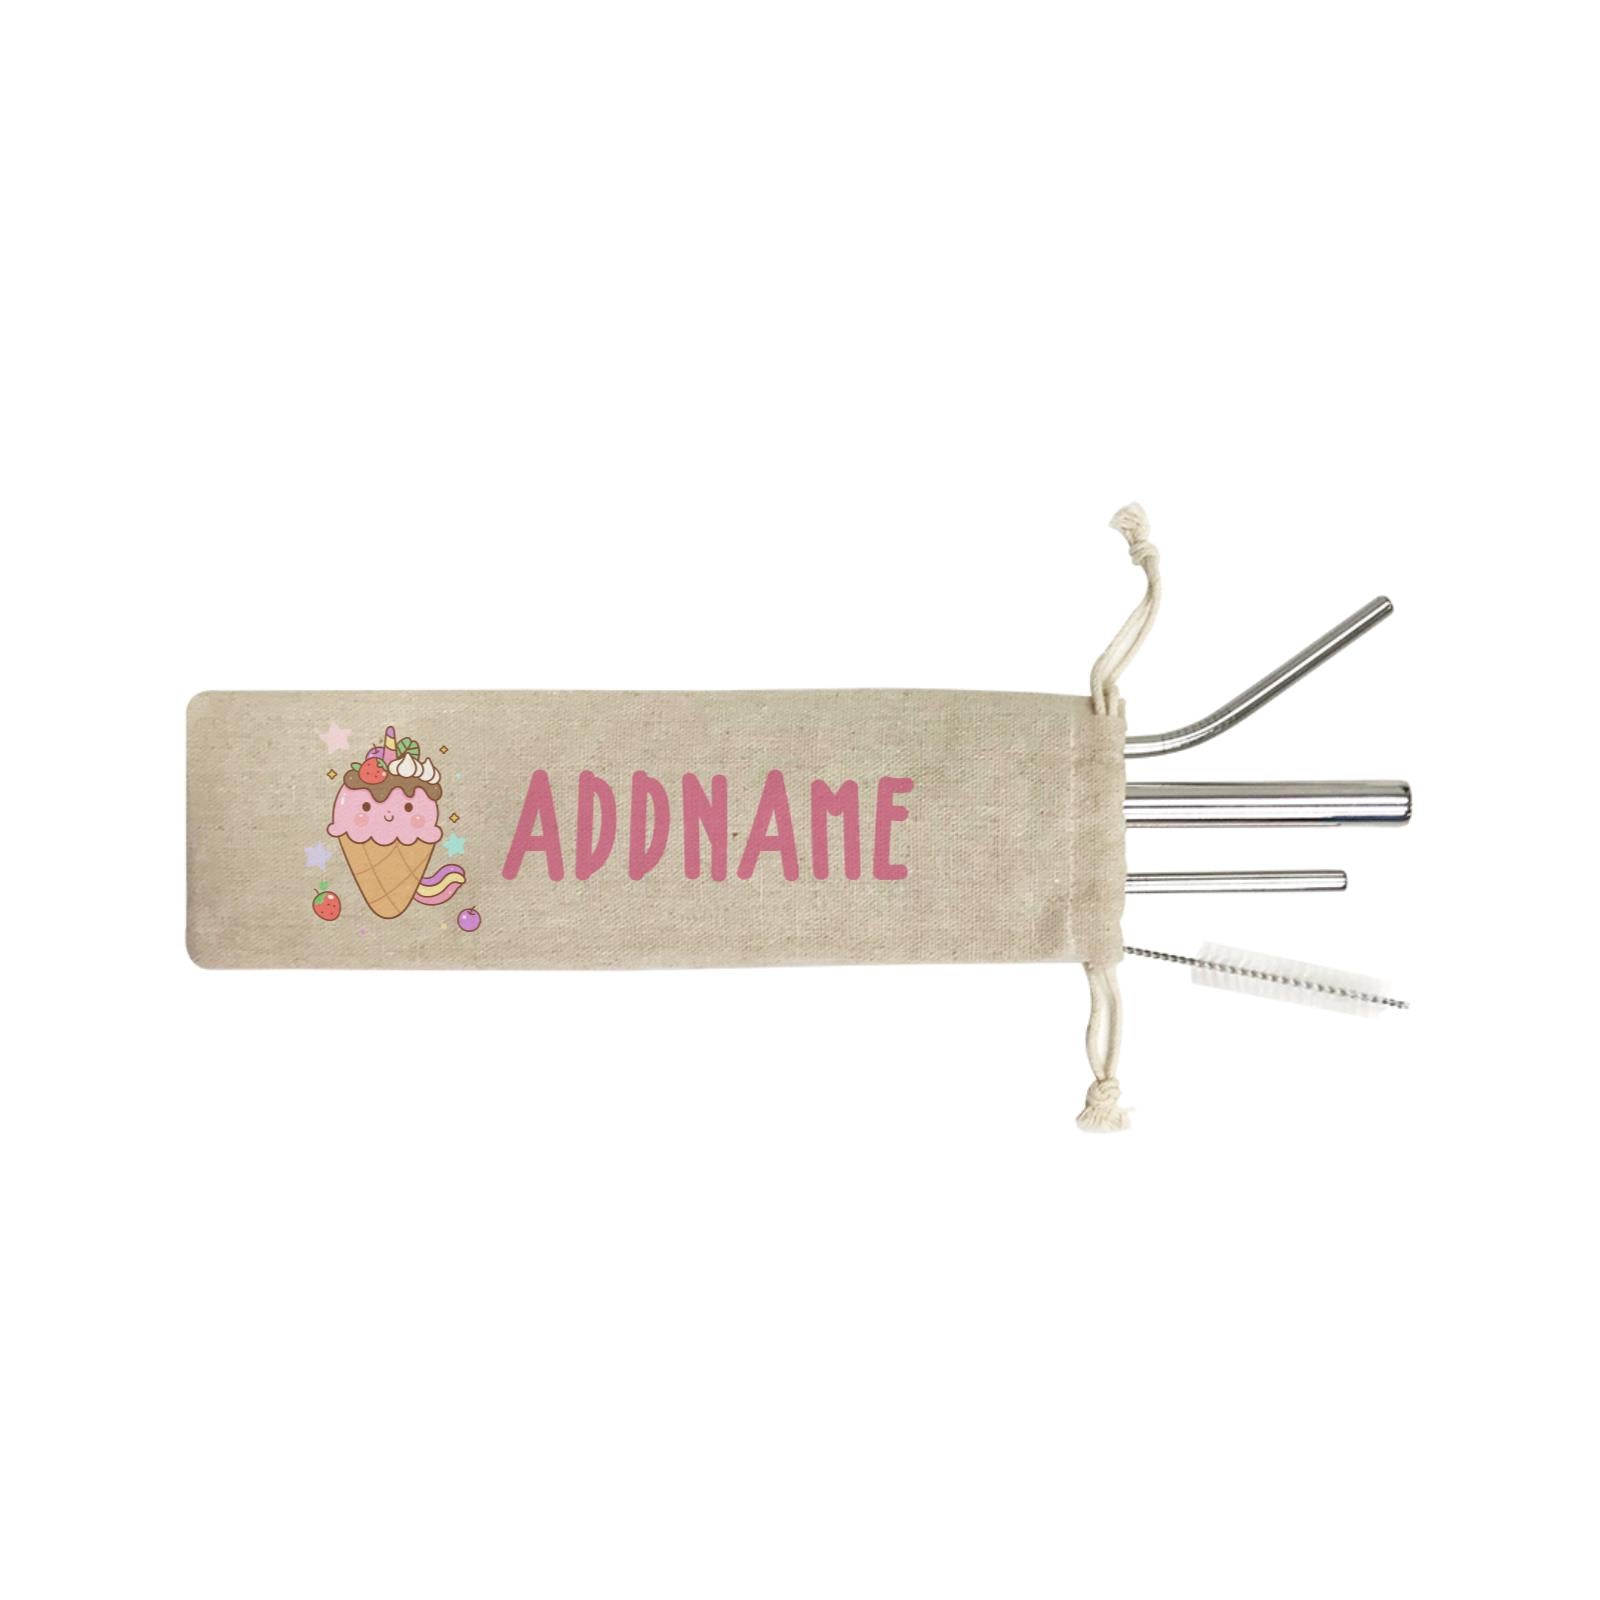 Unicorn And Princess Series Unicorn Ice Cream Addname SB 4-In-1 Stainless Steel Straw Set in Satchel